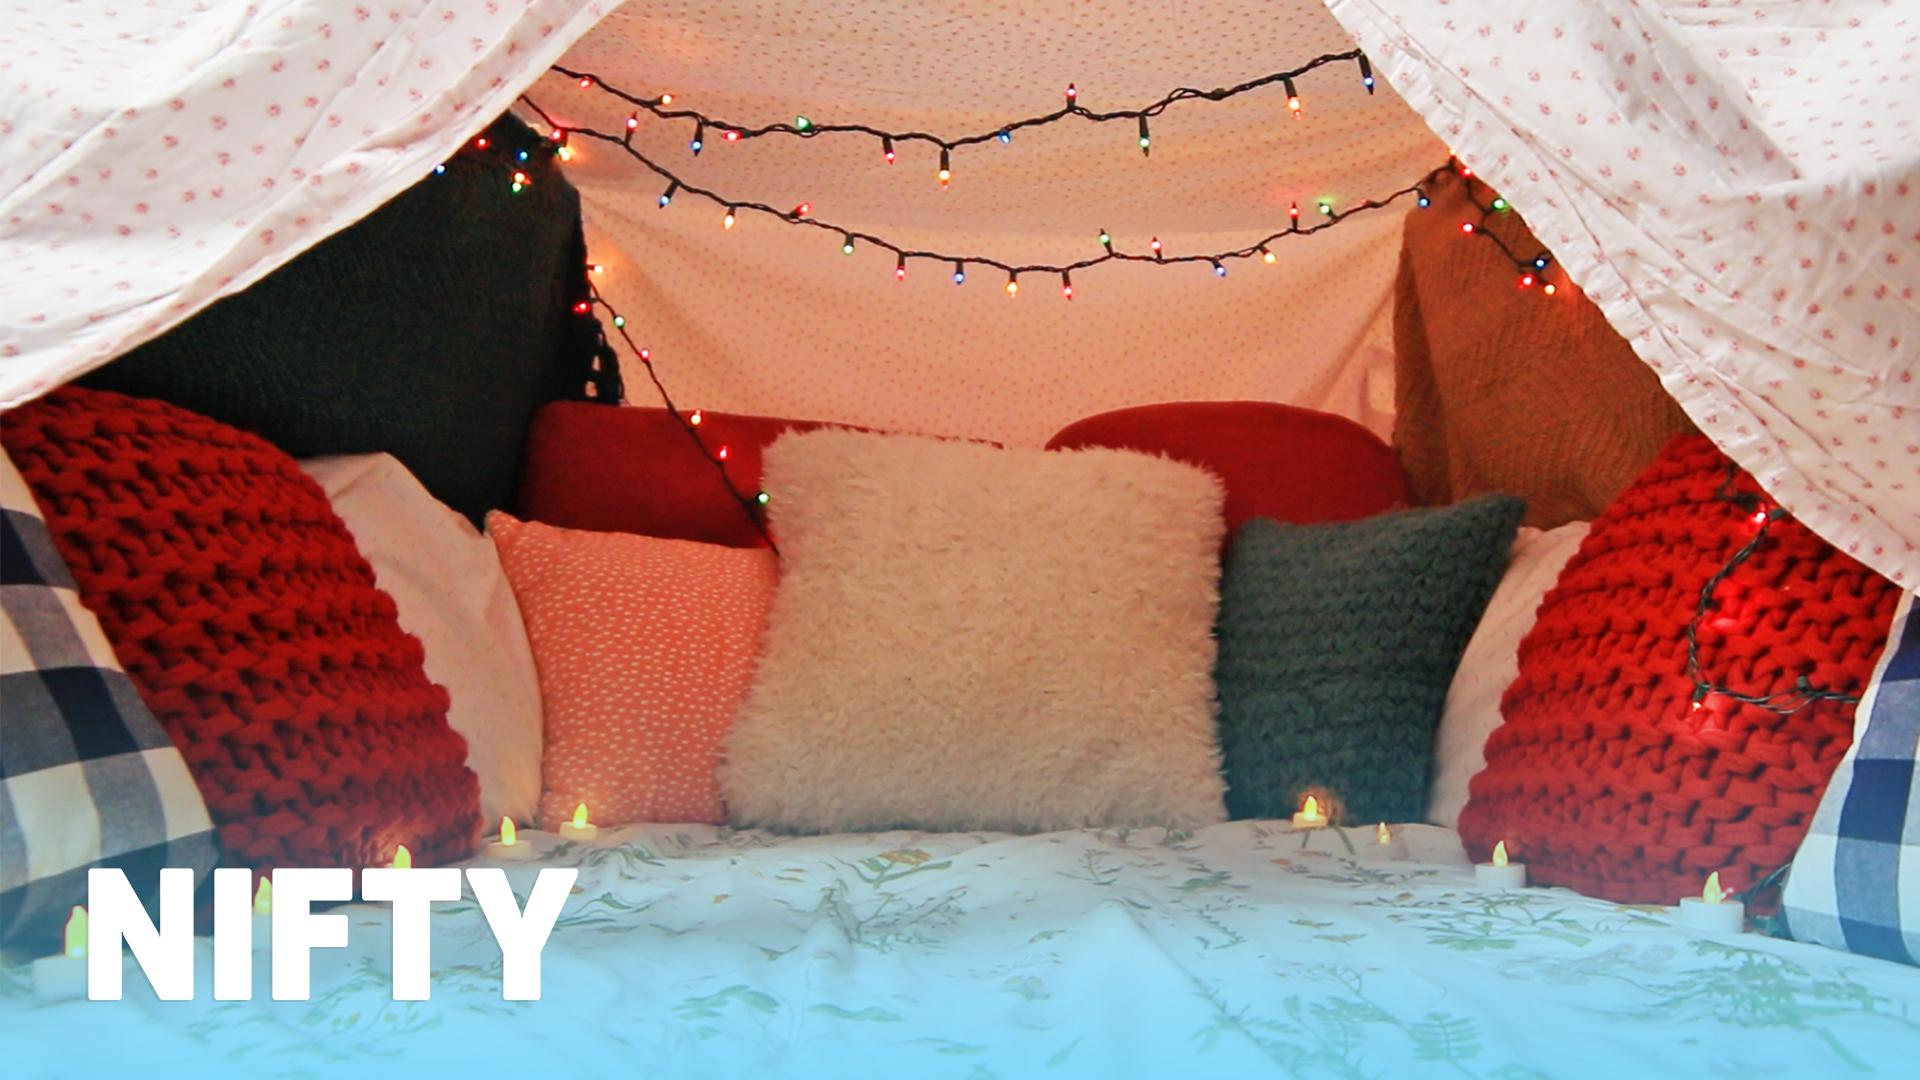 Watch: Nifty - How To Make The Coziest Blanket Fort Ever